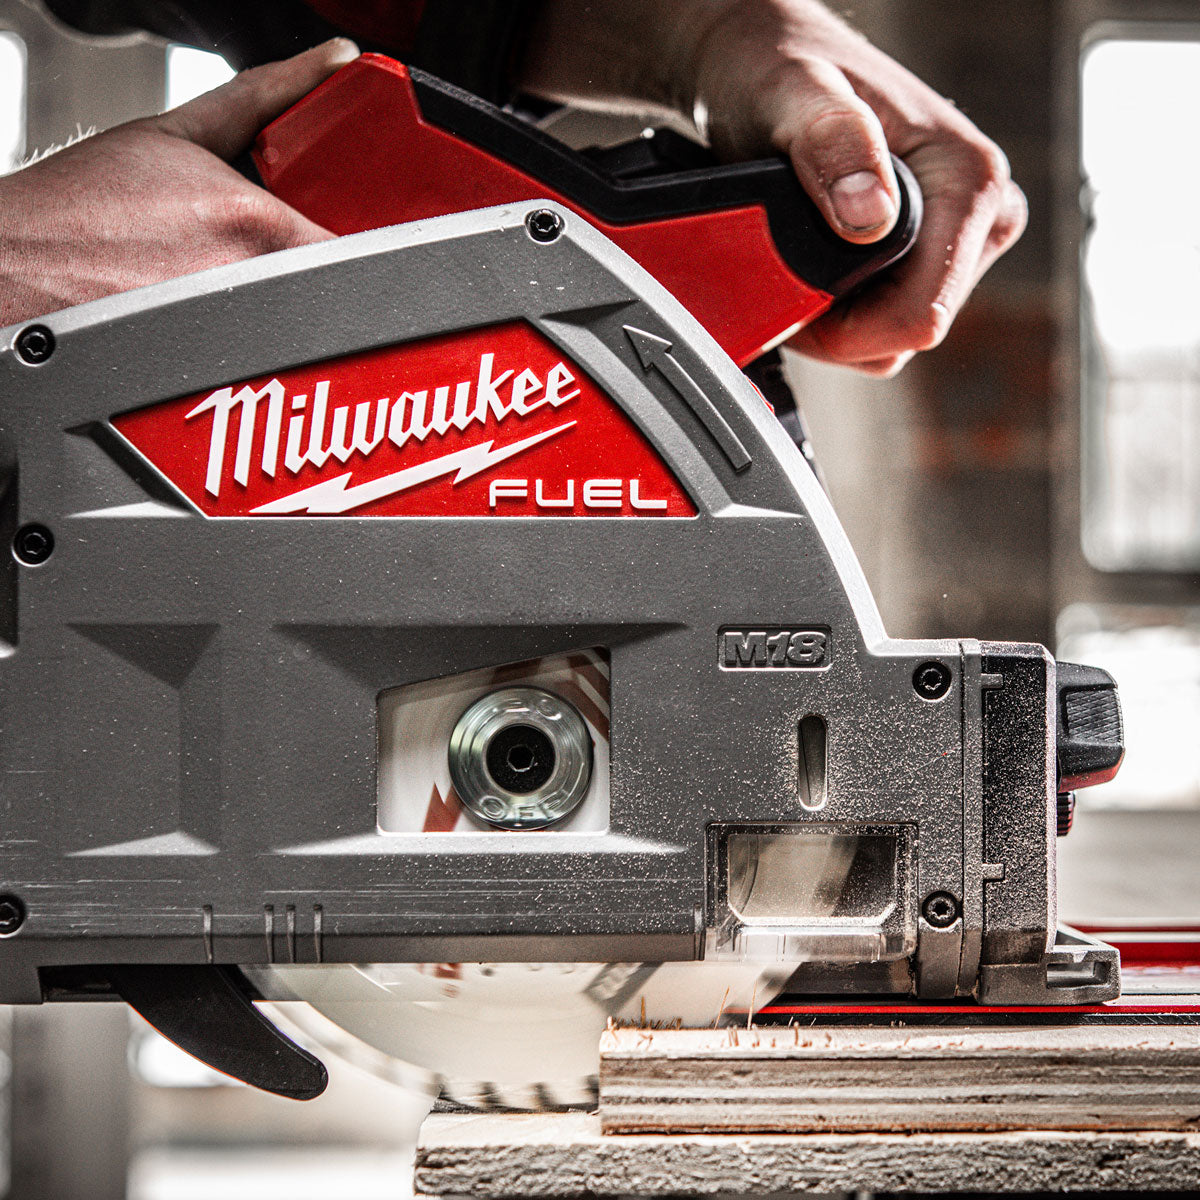 Milwaukee M18FPS55-0P 18V 165mm Fuel Brushless Plunge Saw with 2 x 5.5Ah Battery & Guide Rail Kit